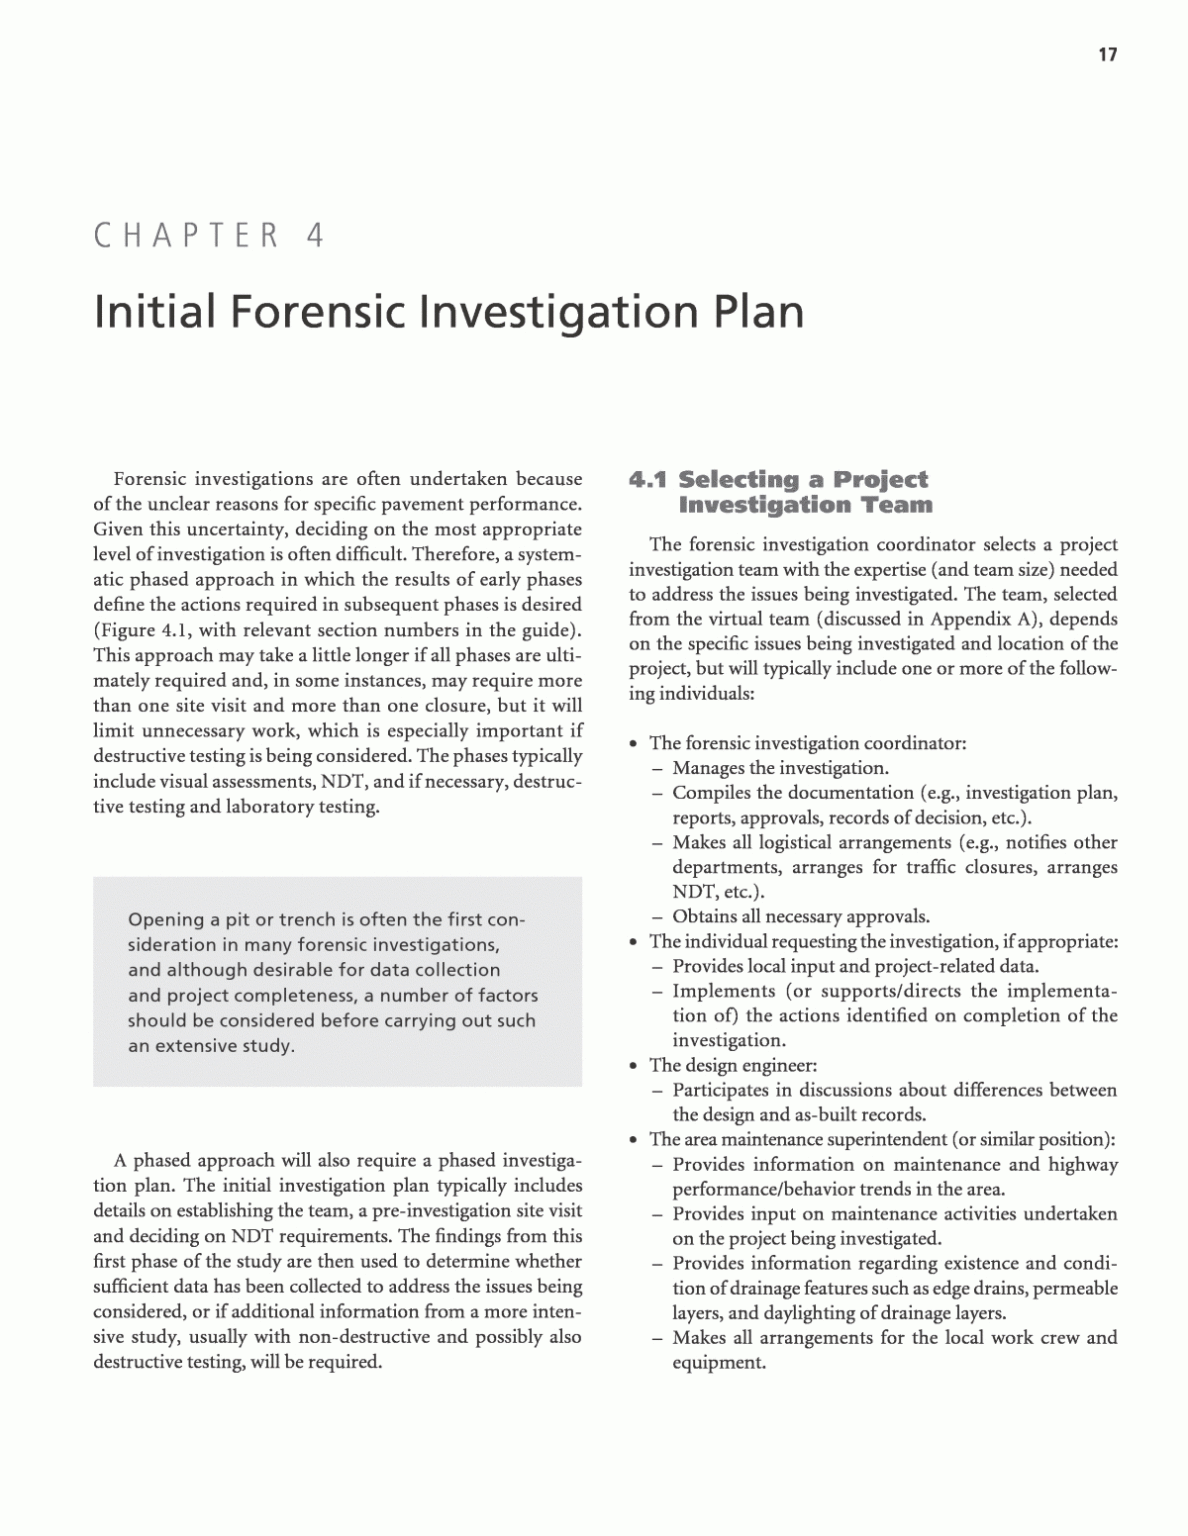 GigaTribe Forensic Guide